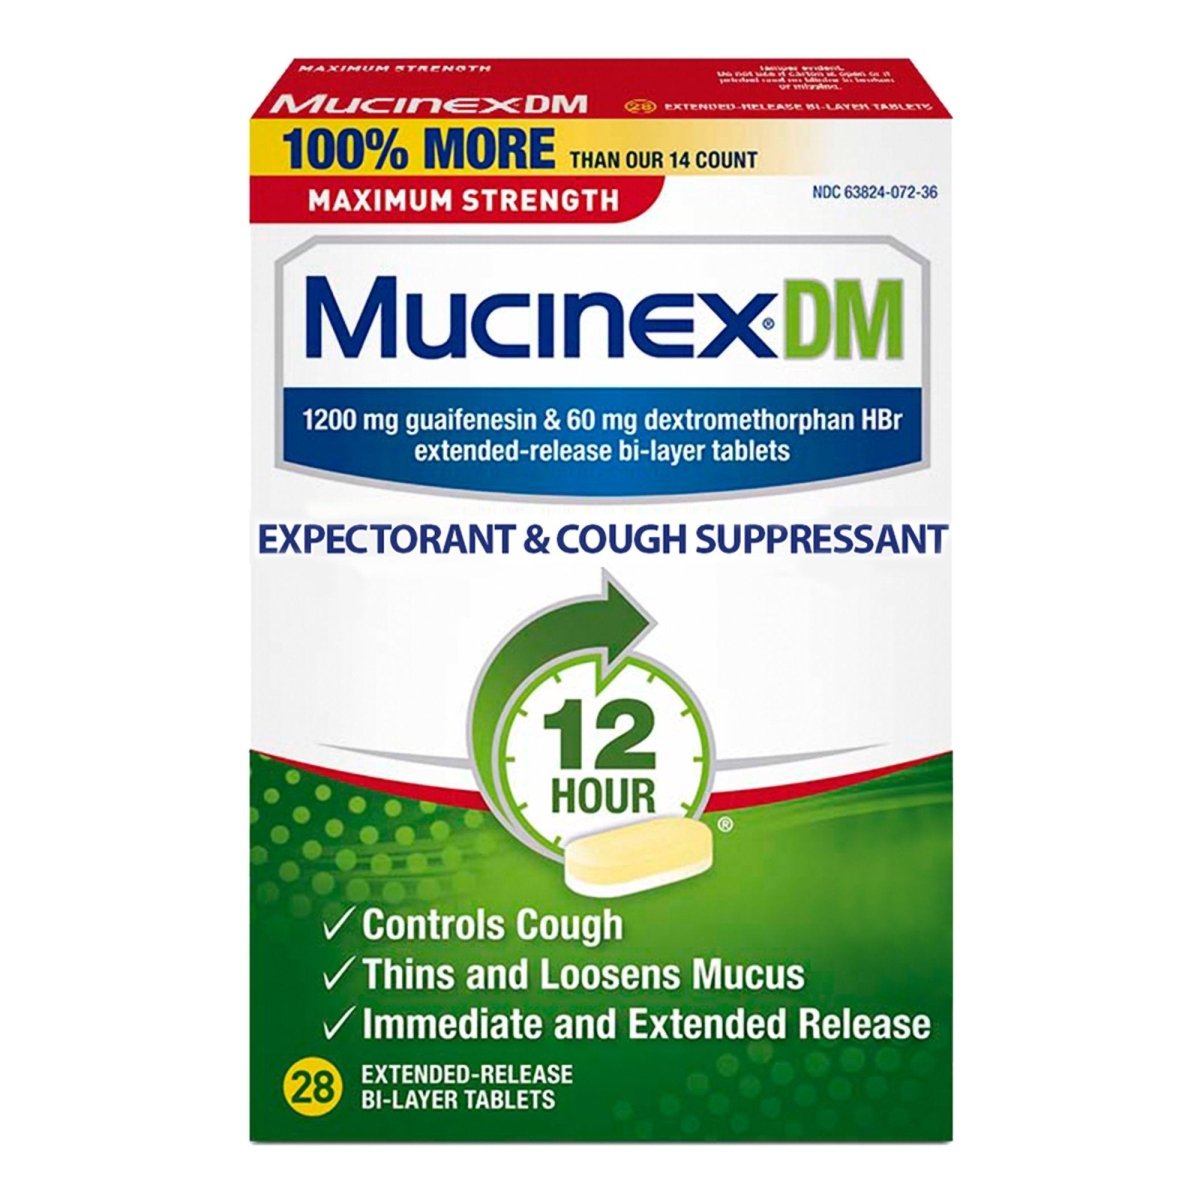 Mucinex Dm Cold And Cough Relief - 1101457_BX - 1